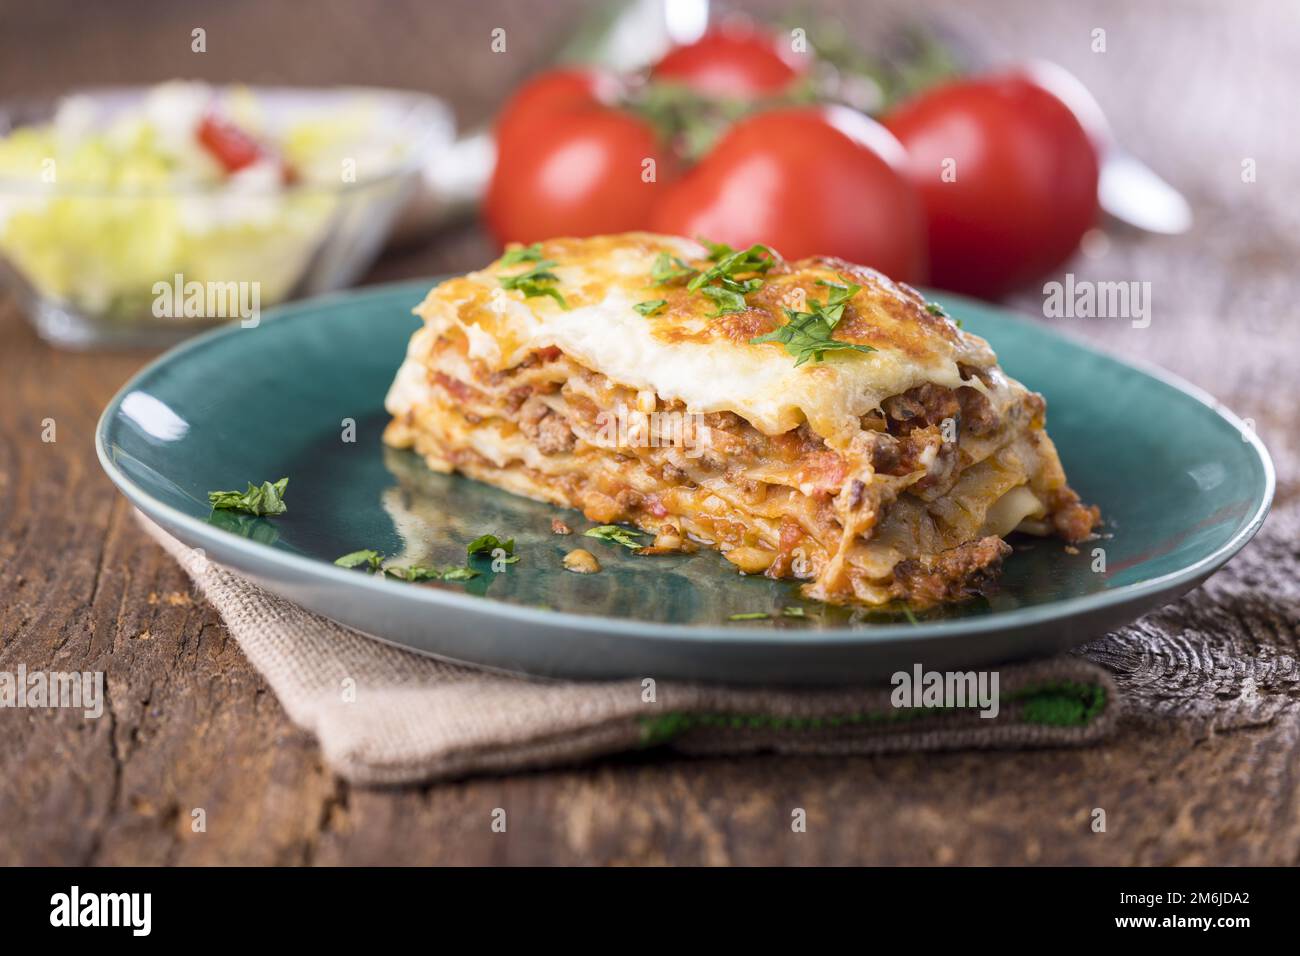 Portion of lasagna on a green plate Stock Photo